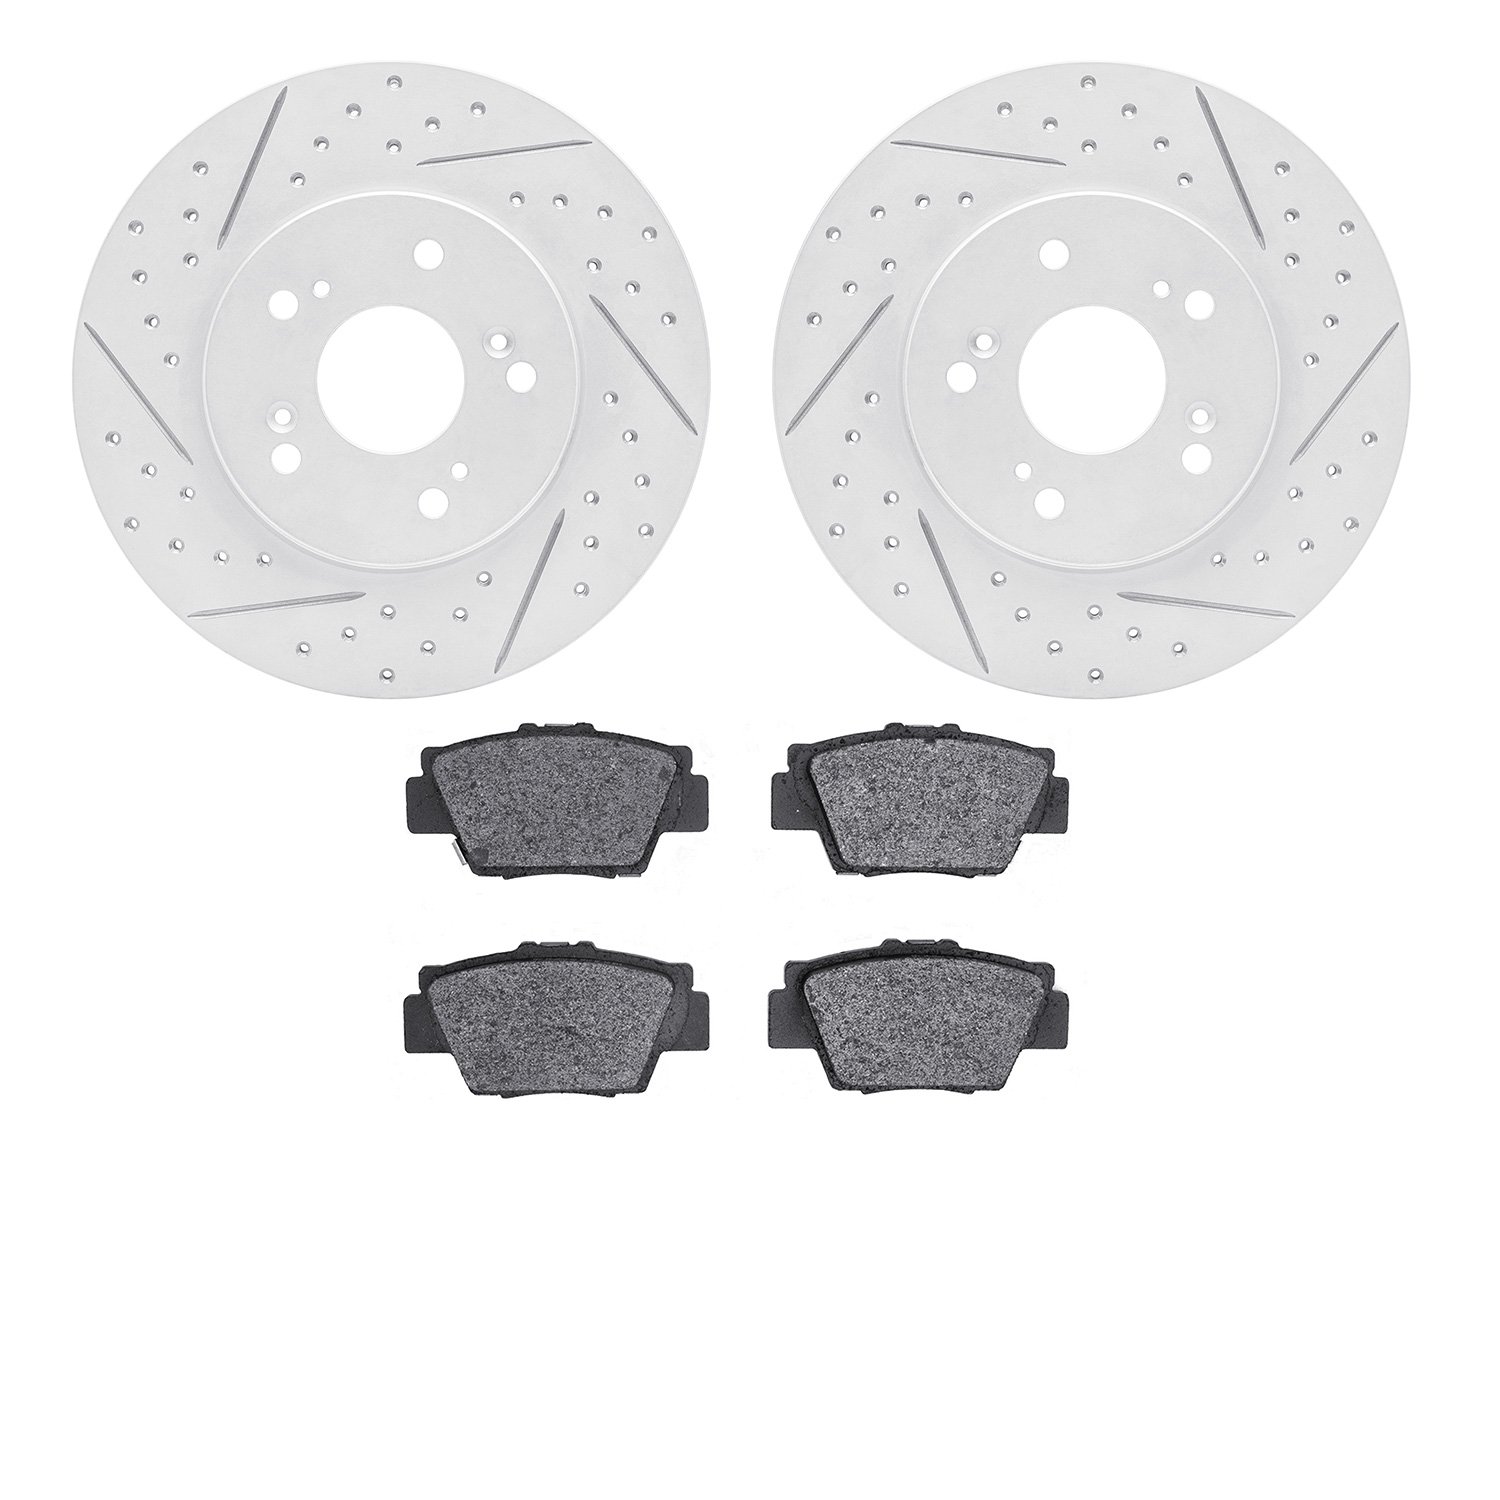 2502-58002 Geoperformance Drilled/Slotted Rotors w/5000 Advanced Brake Pads Kit, 1991-1996 Acura/Honda, Position: Rear